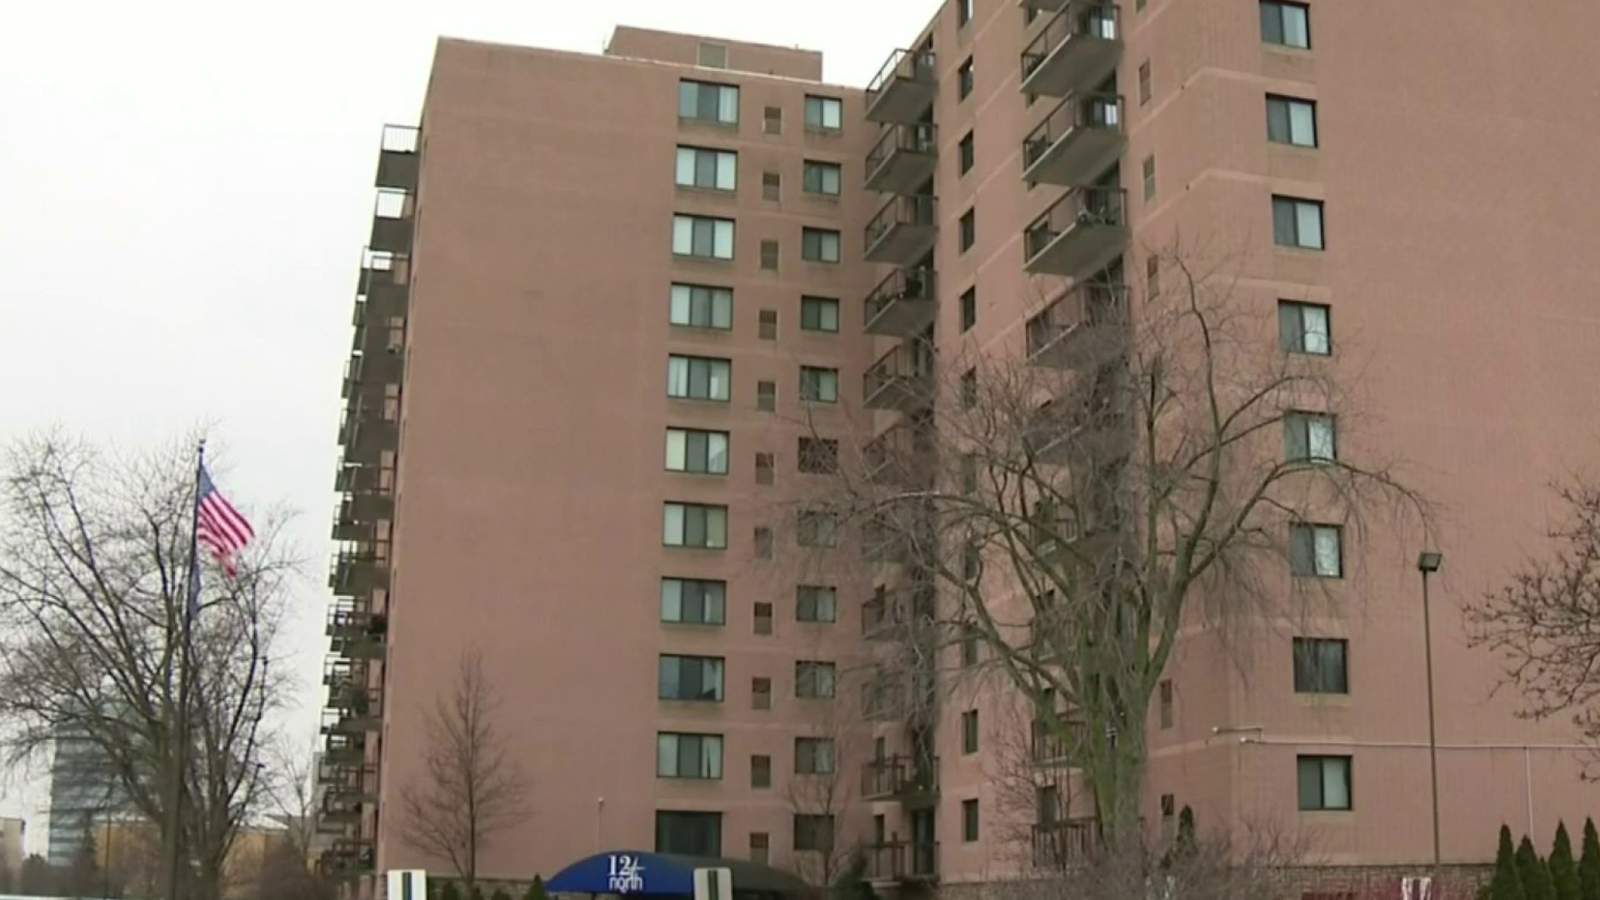 8-year-old girl in critical condition after being shot in head at Southfield apartment complex